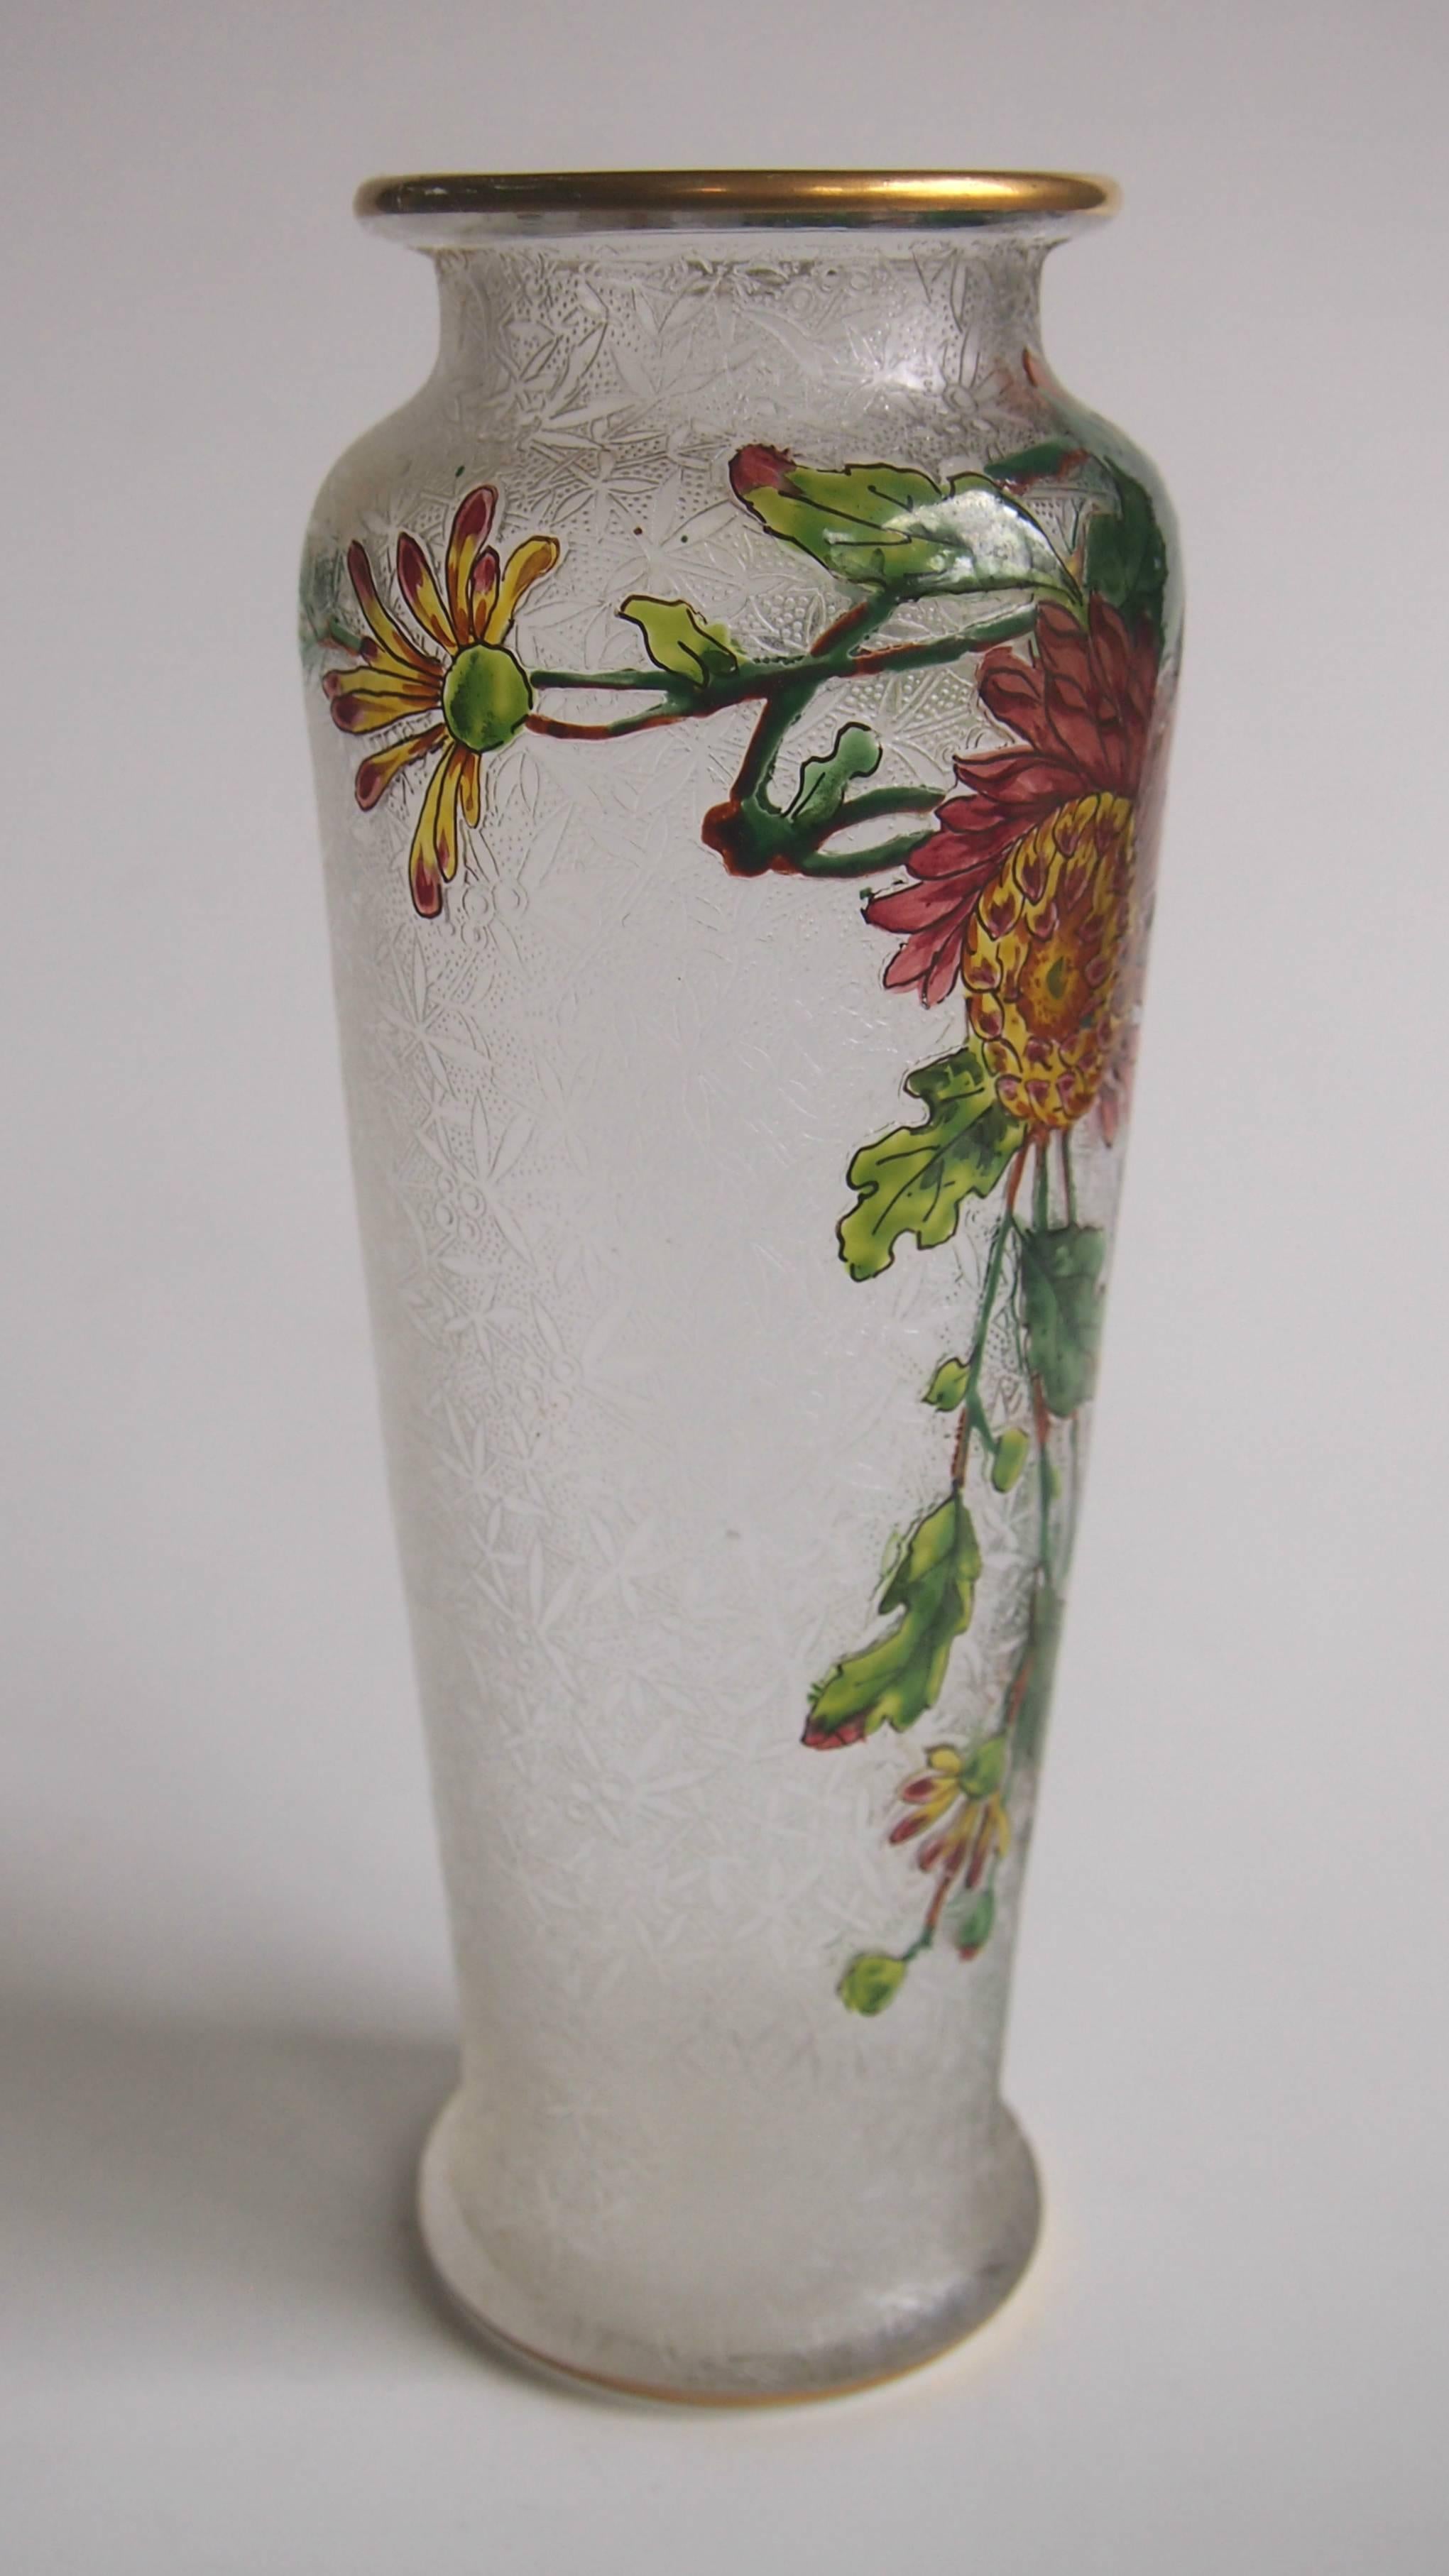 A superb Art Nouveau Baccarat crystal acid cut back vase with vibrant polychrome enamelled flowers and leaves with a gilded top and bottom. As with most early Baccarat cameo and acid cutbacks there is a fine pattern detailed in the clear layer.